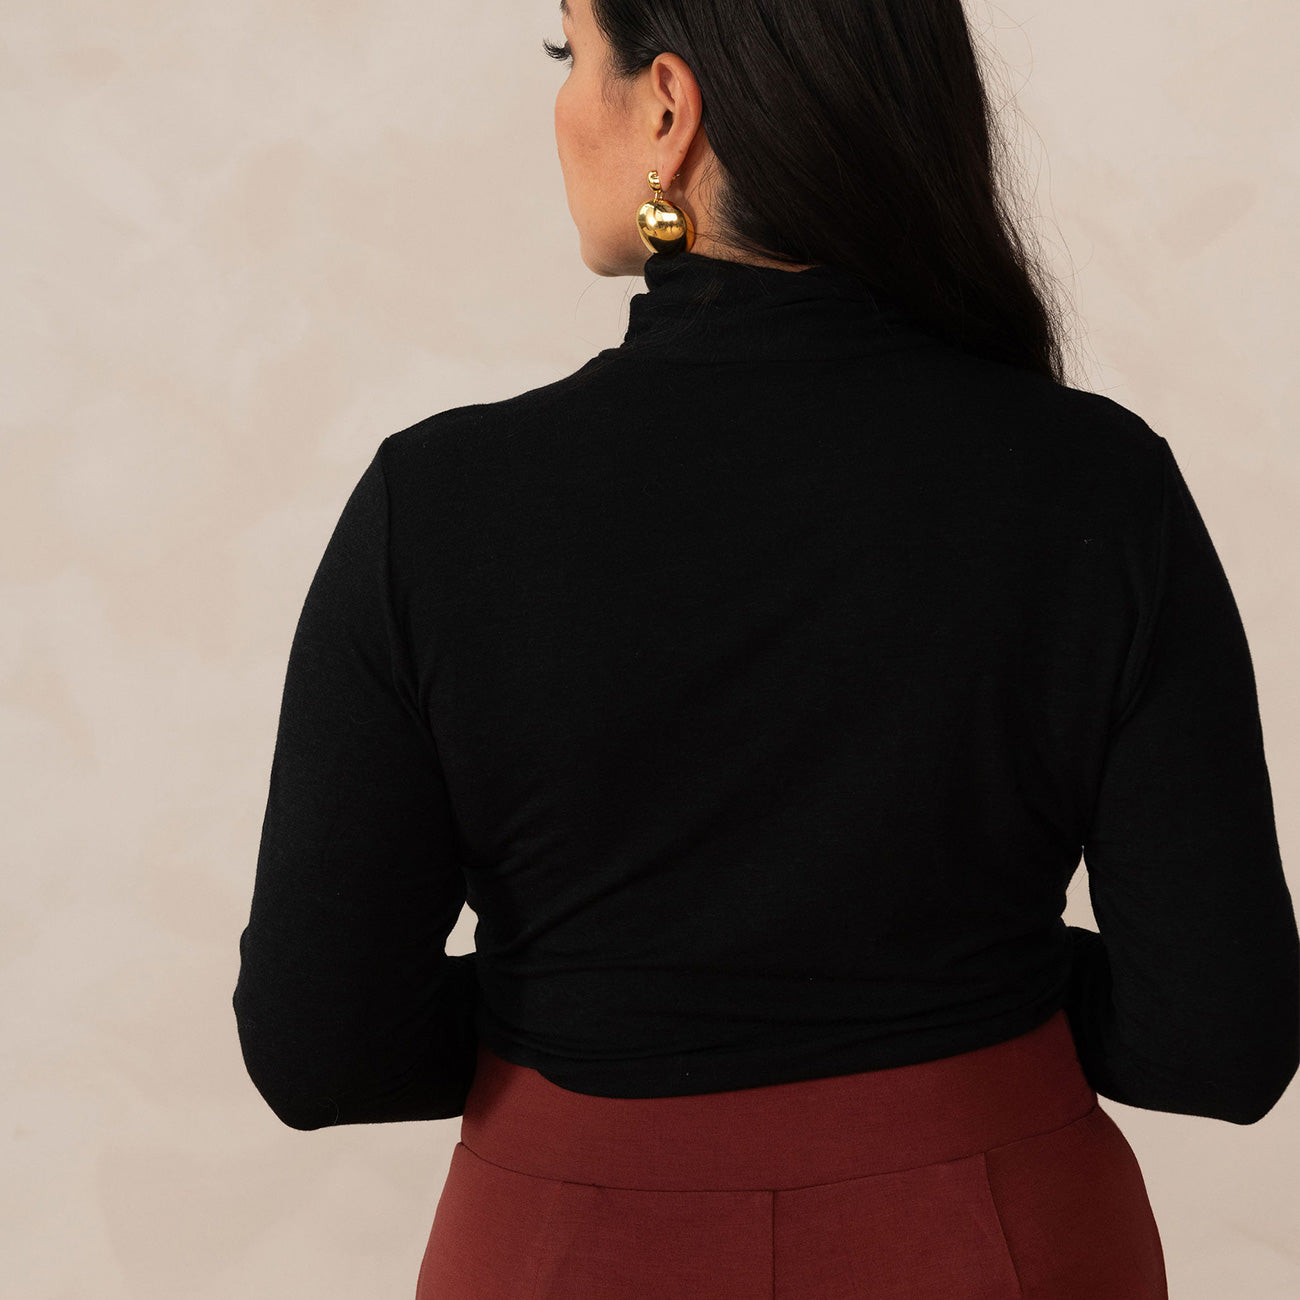 back of a woman wearing a black turtleneck with brick colour pants